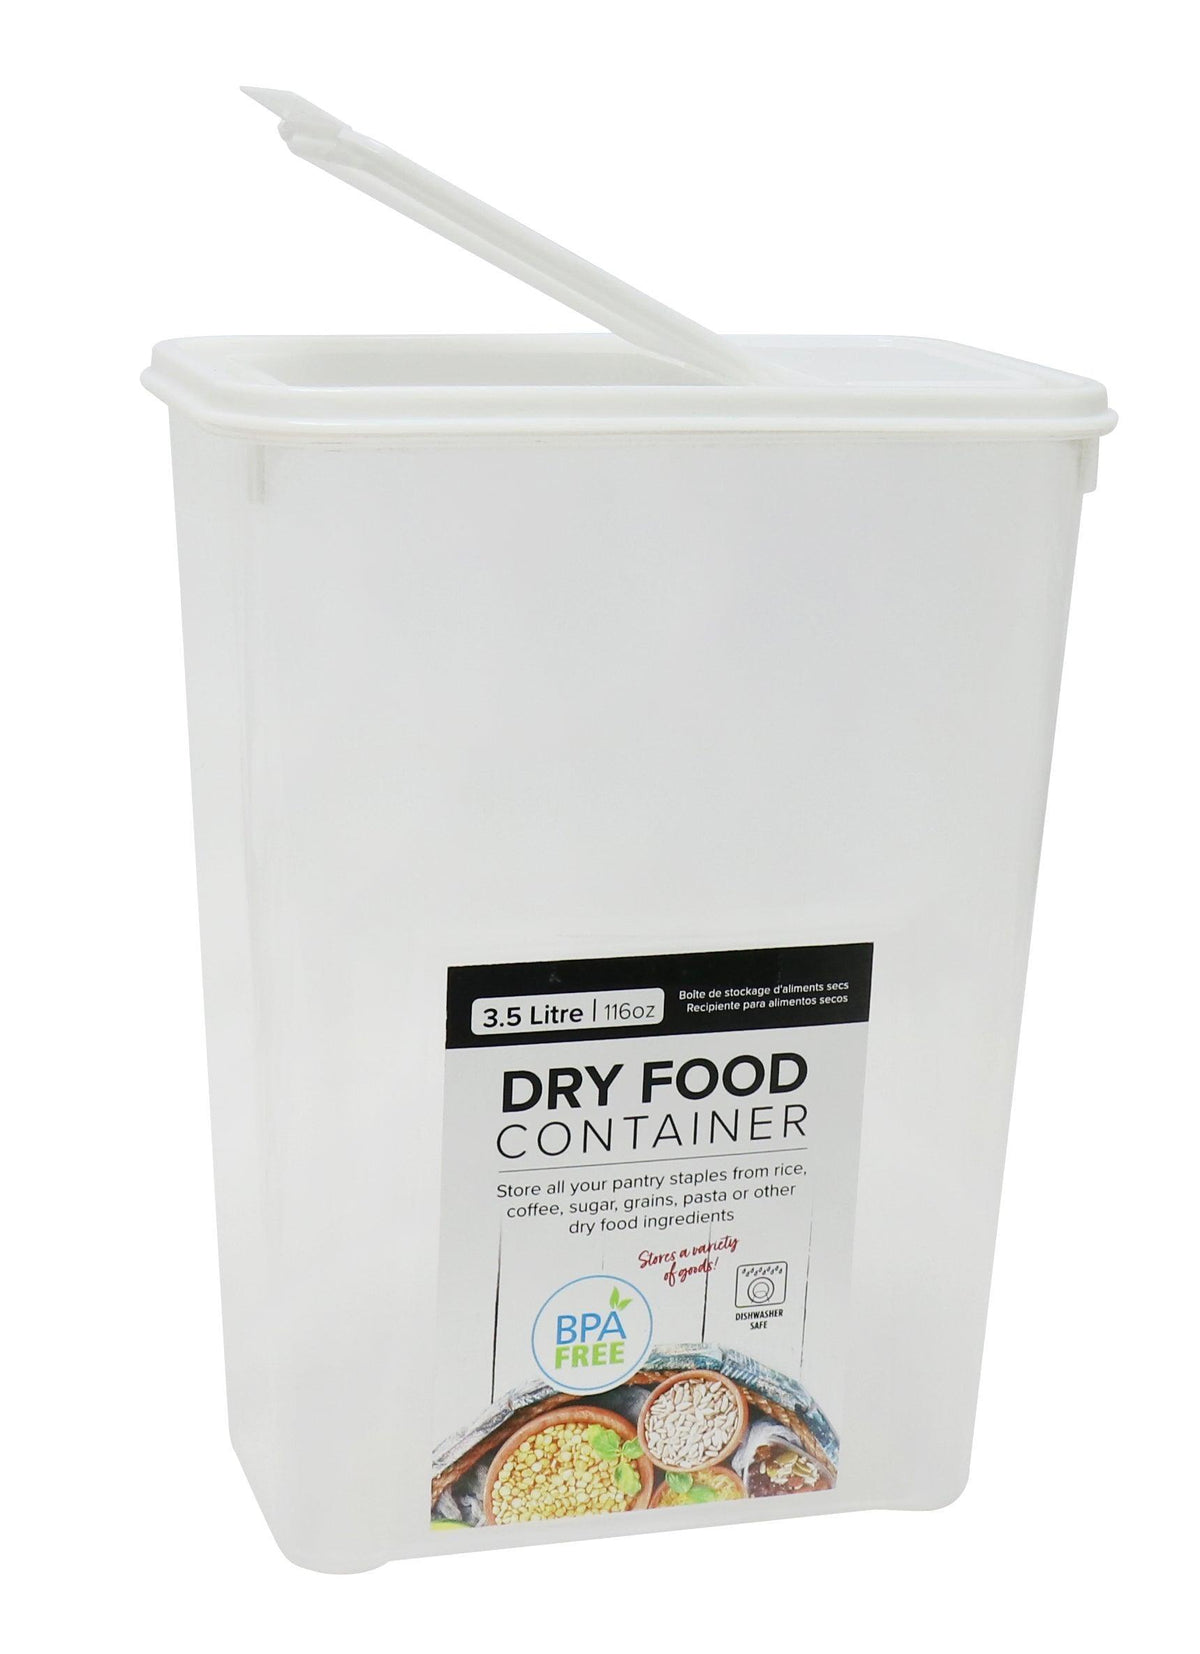 UBL Dry Food Container 3 Litre - Choice Stores